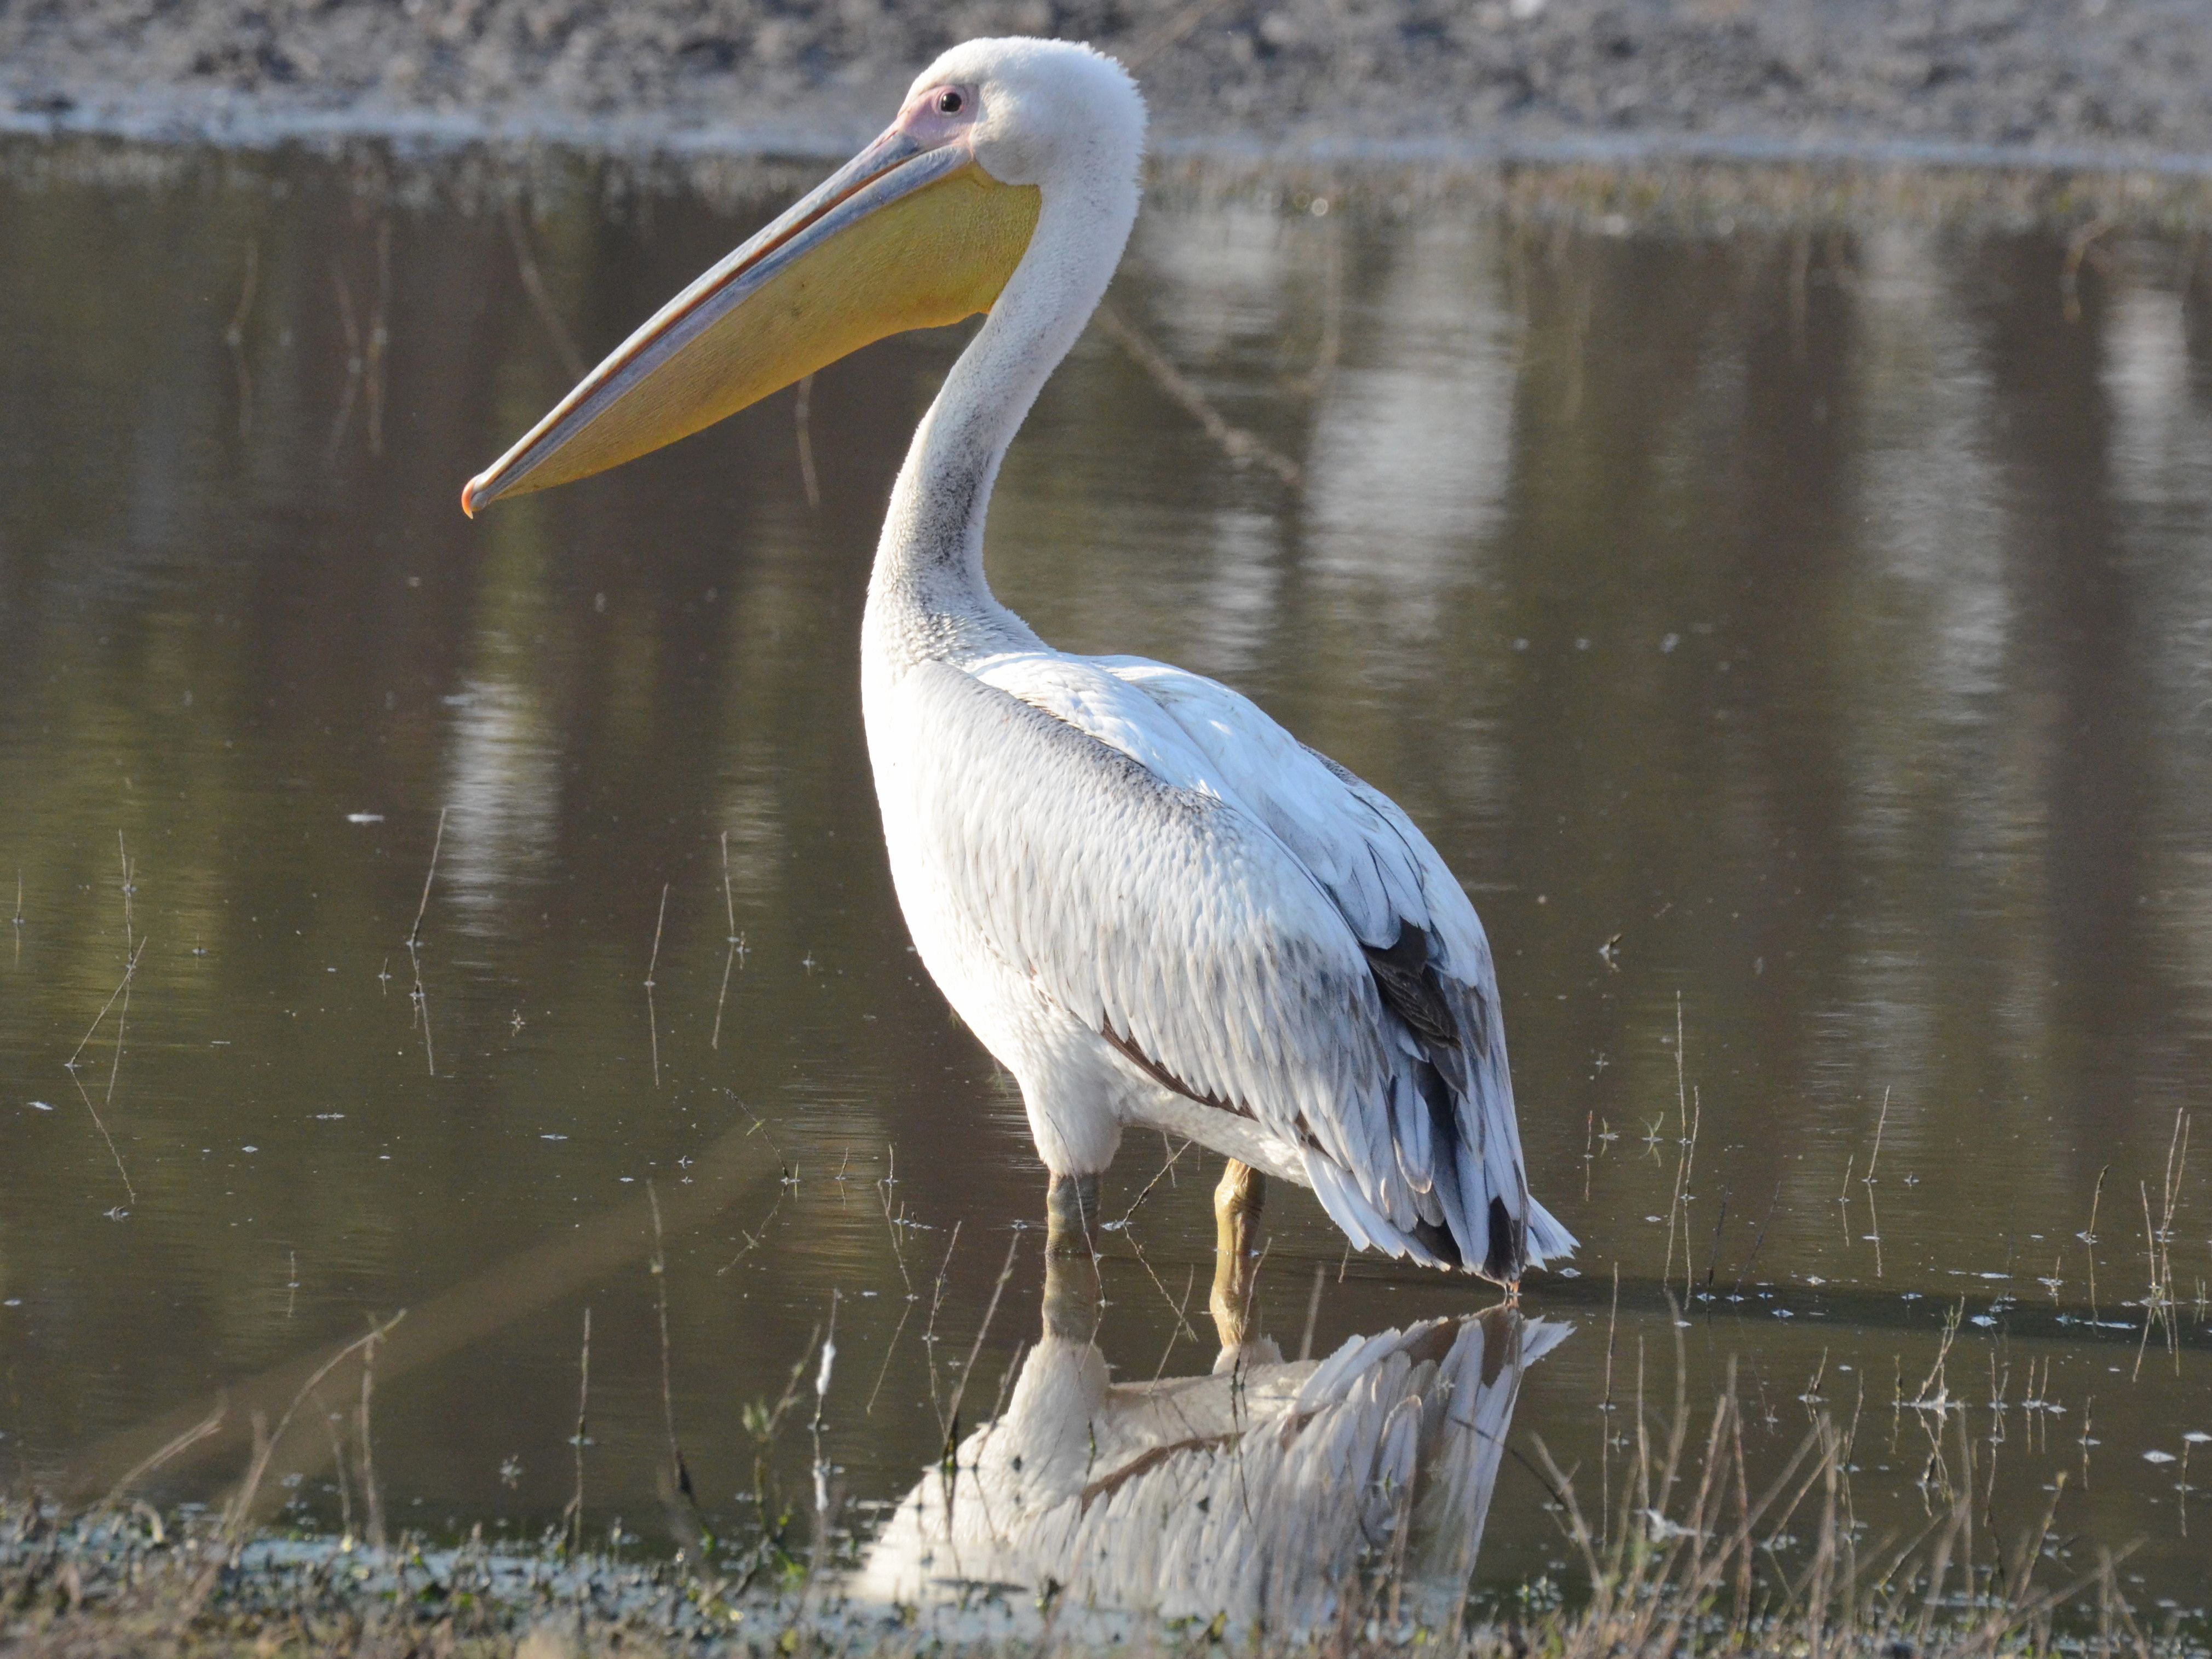 Click picture to see more Great White Pelicans.